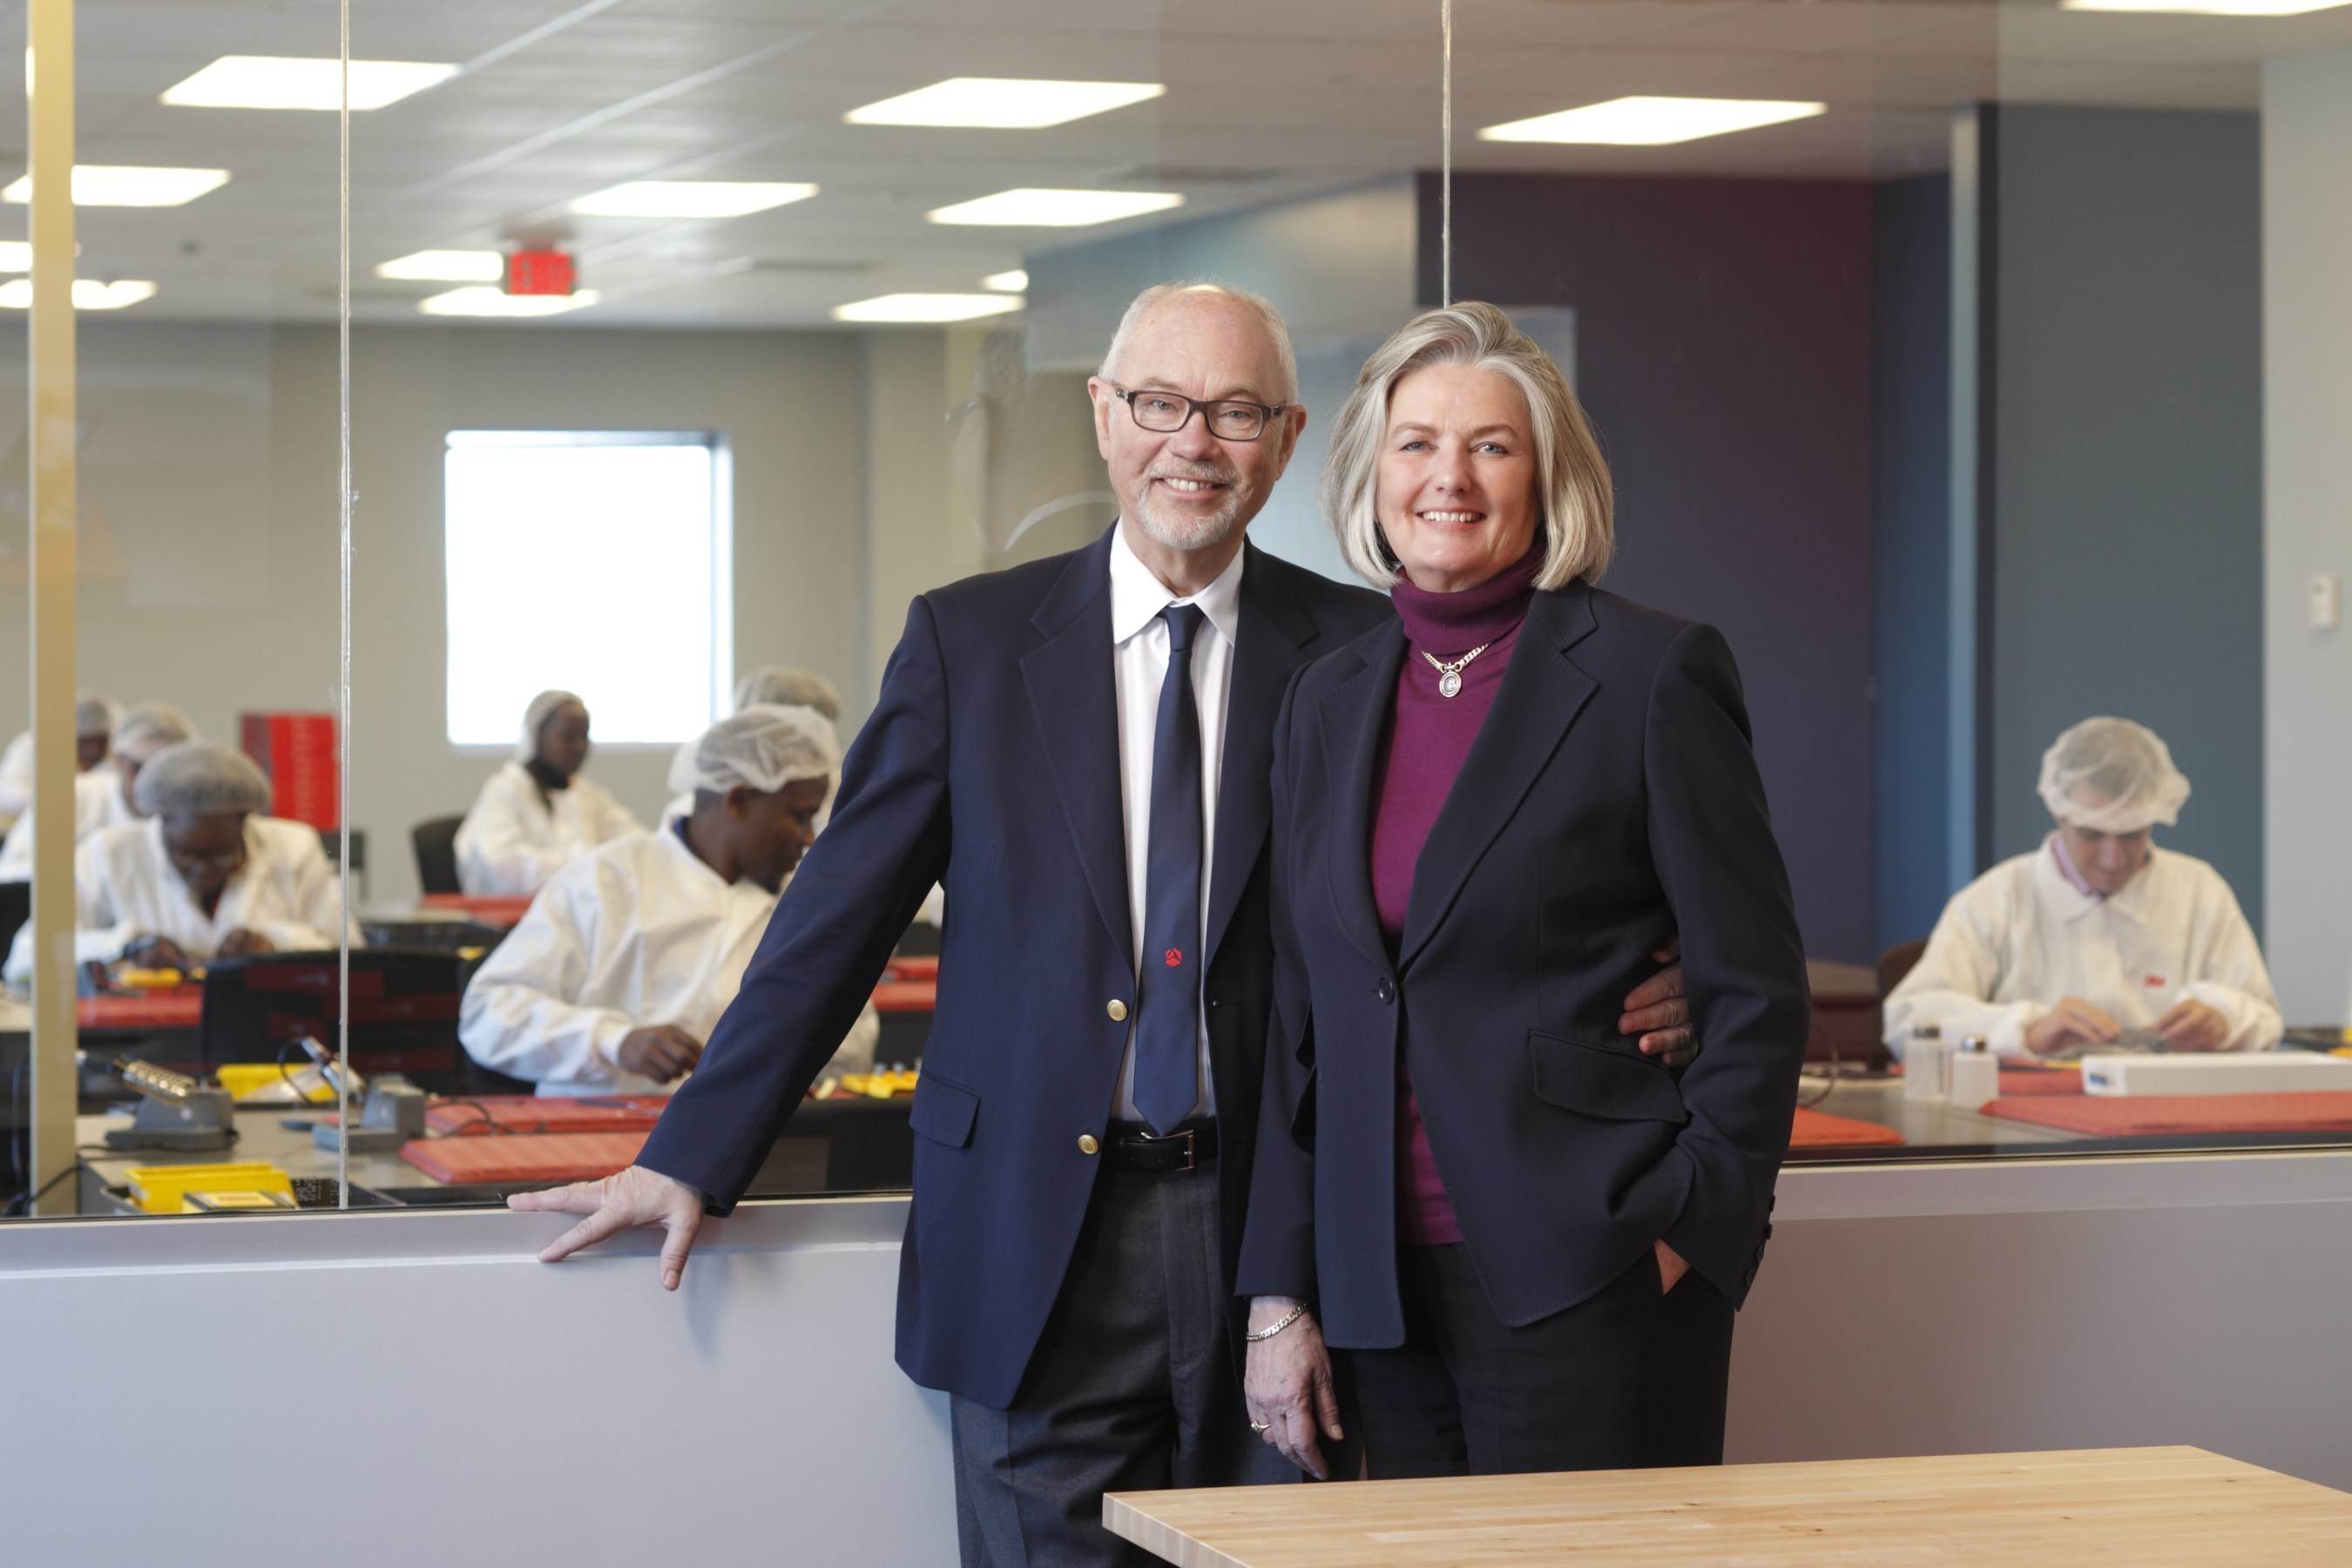 Ulla and JP Bak, co-founders of Bak USA, debut PC tablet company's world headquarters in Buffalo, NY. Bak tablets are completely assembled in the USA.